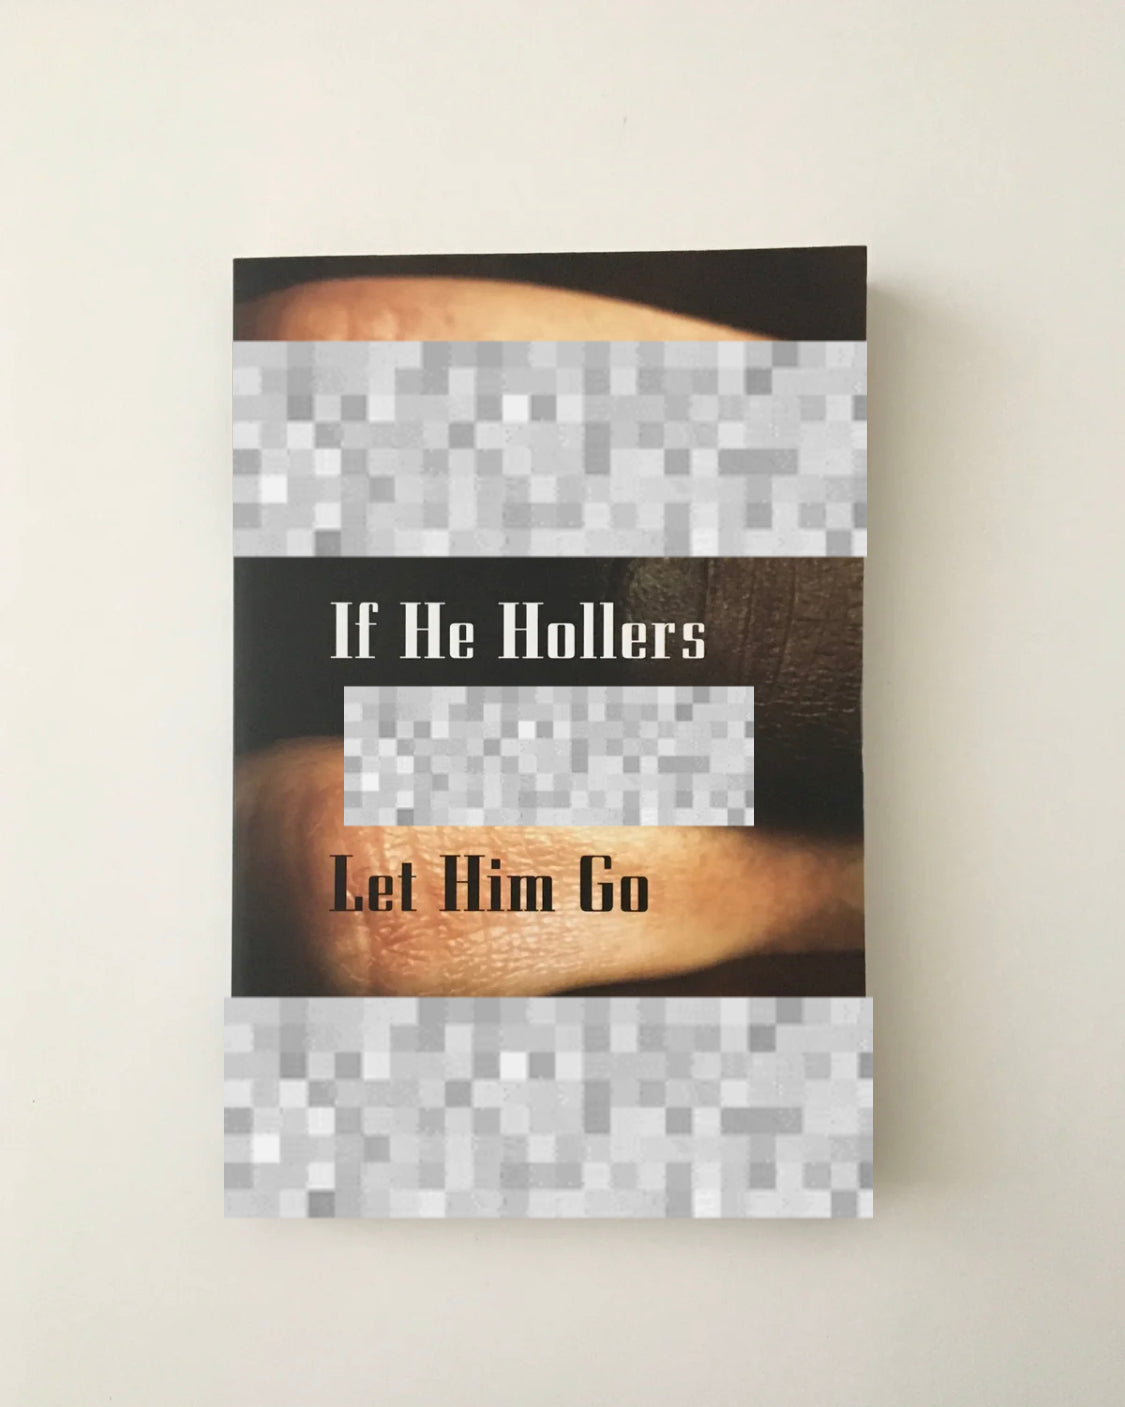 If He Hollers by Chester Himes